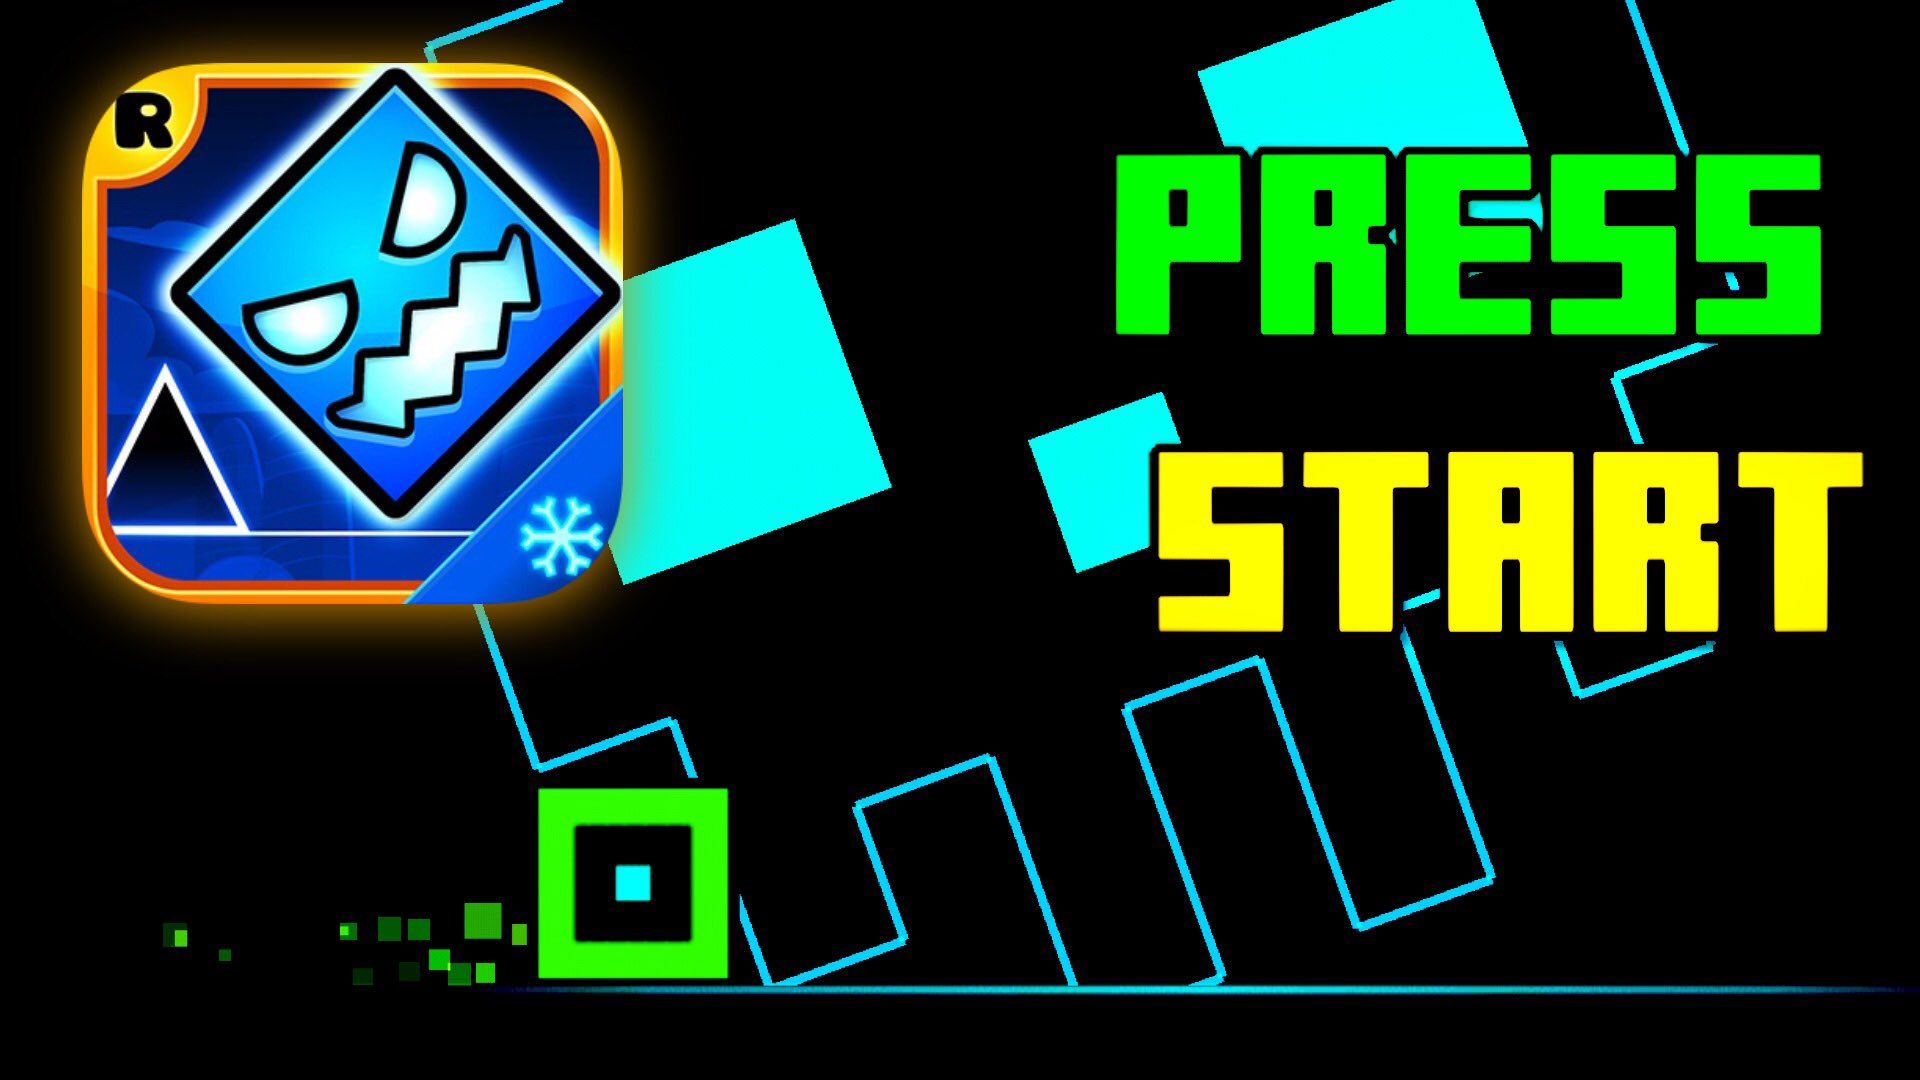 Benztar game + New features = Incredible If you haven't yet, make sure to check out the new game 'Geometry Dash: SubZero' and it's new level, 'Press Start' here!